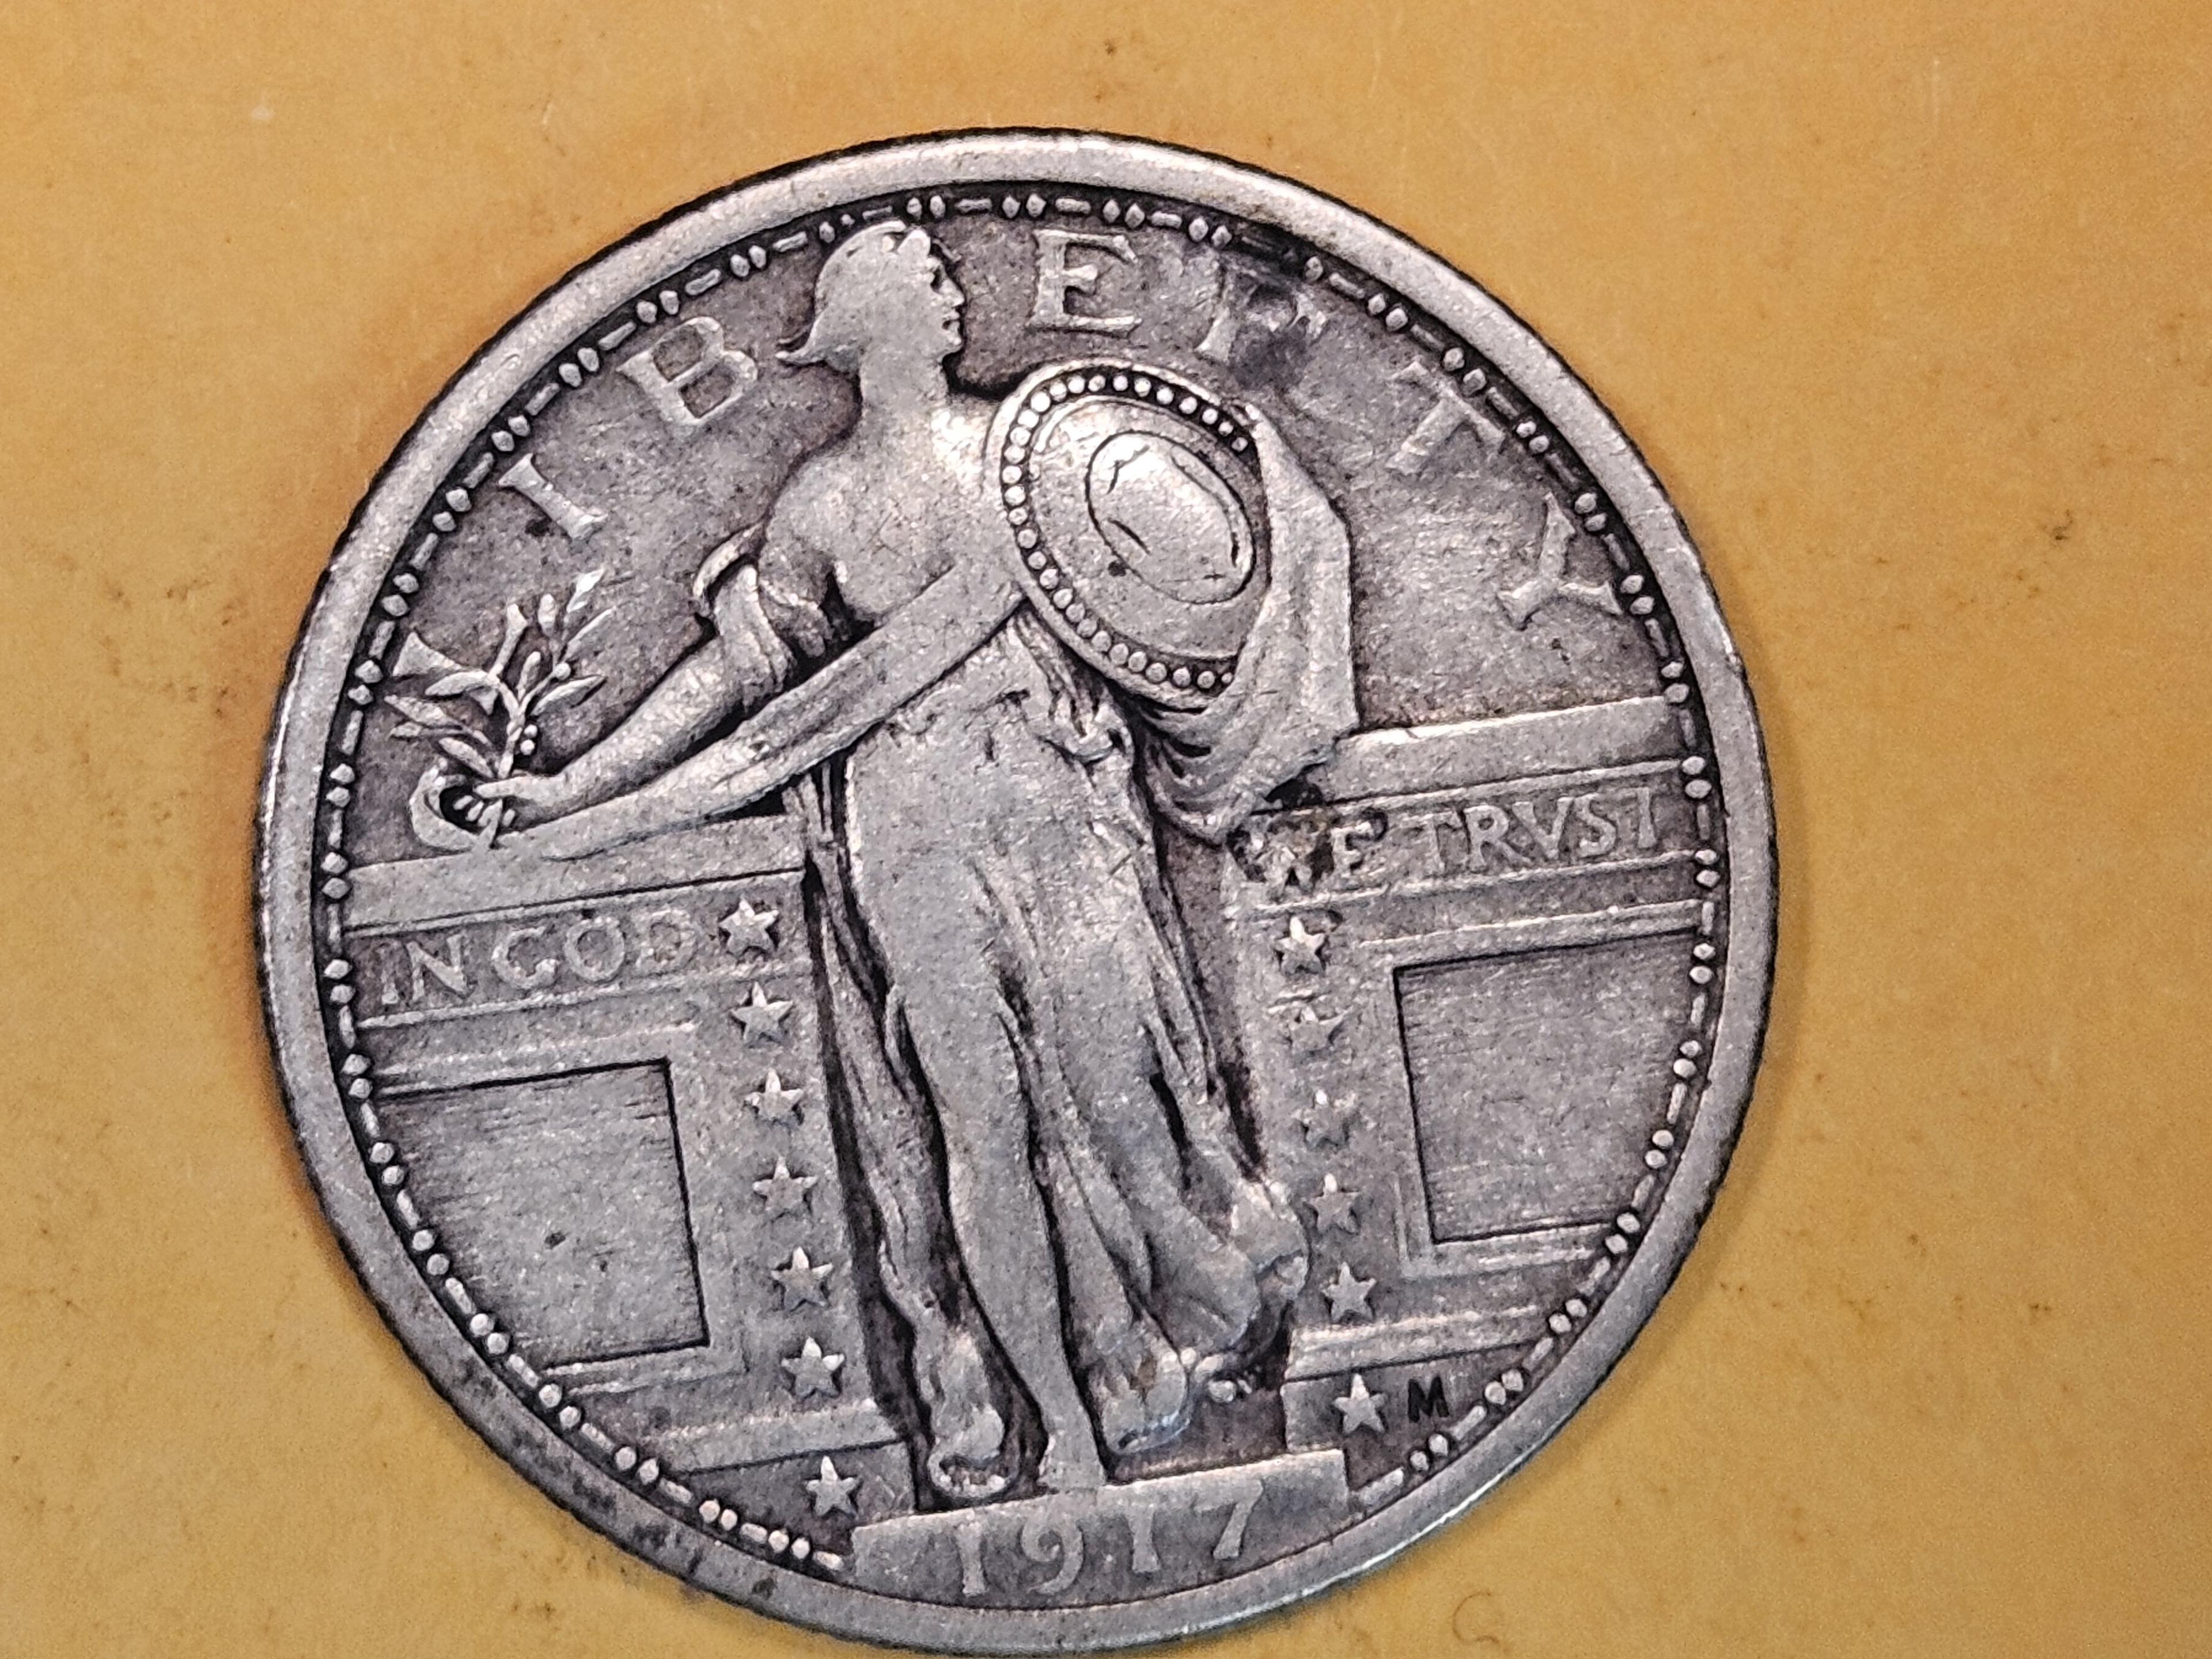 Early 1917 Type 1 Standing Liberty Quarter